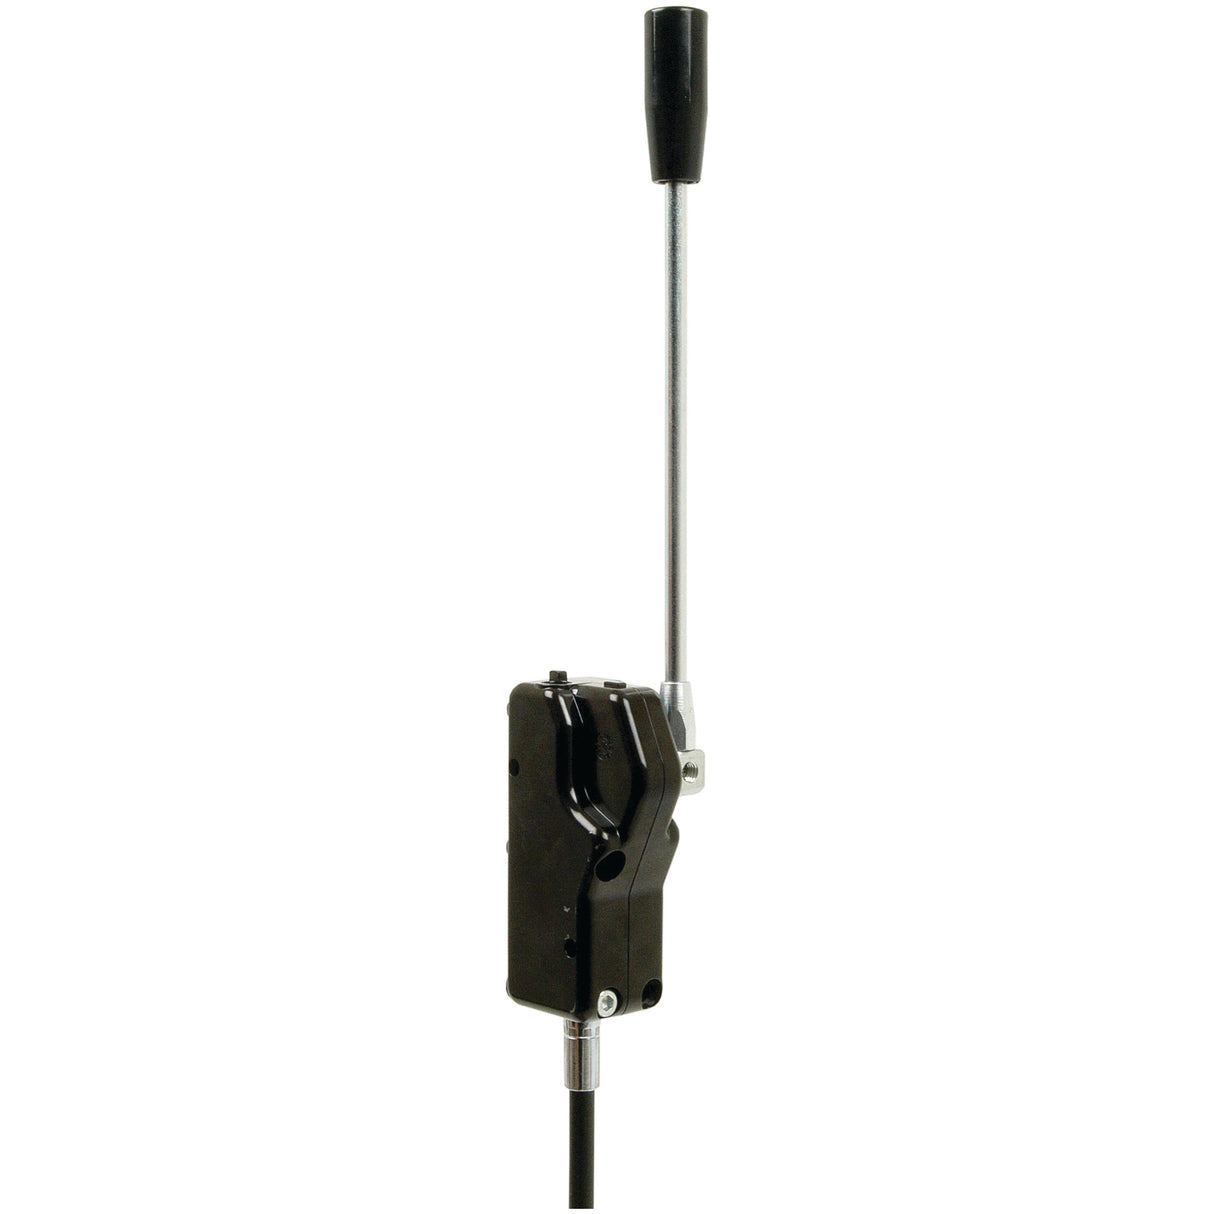 Remote Control Assembly with Standard Black Handle 2.5M Cable
 - S.101643 - Farming Parts